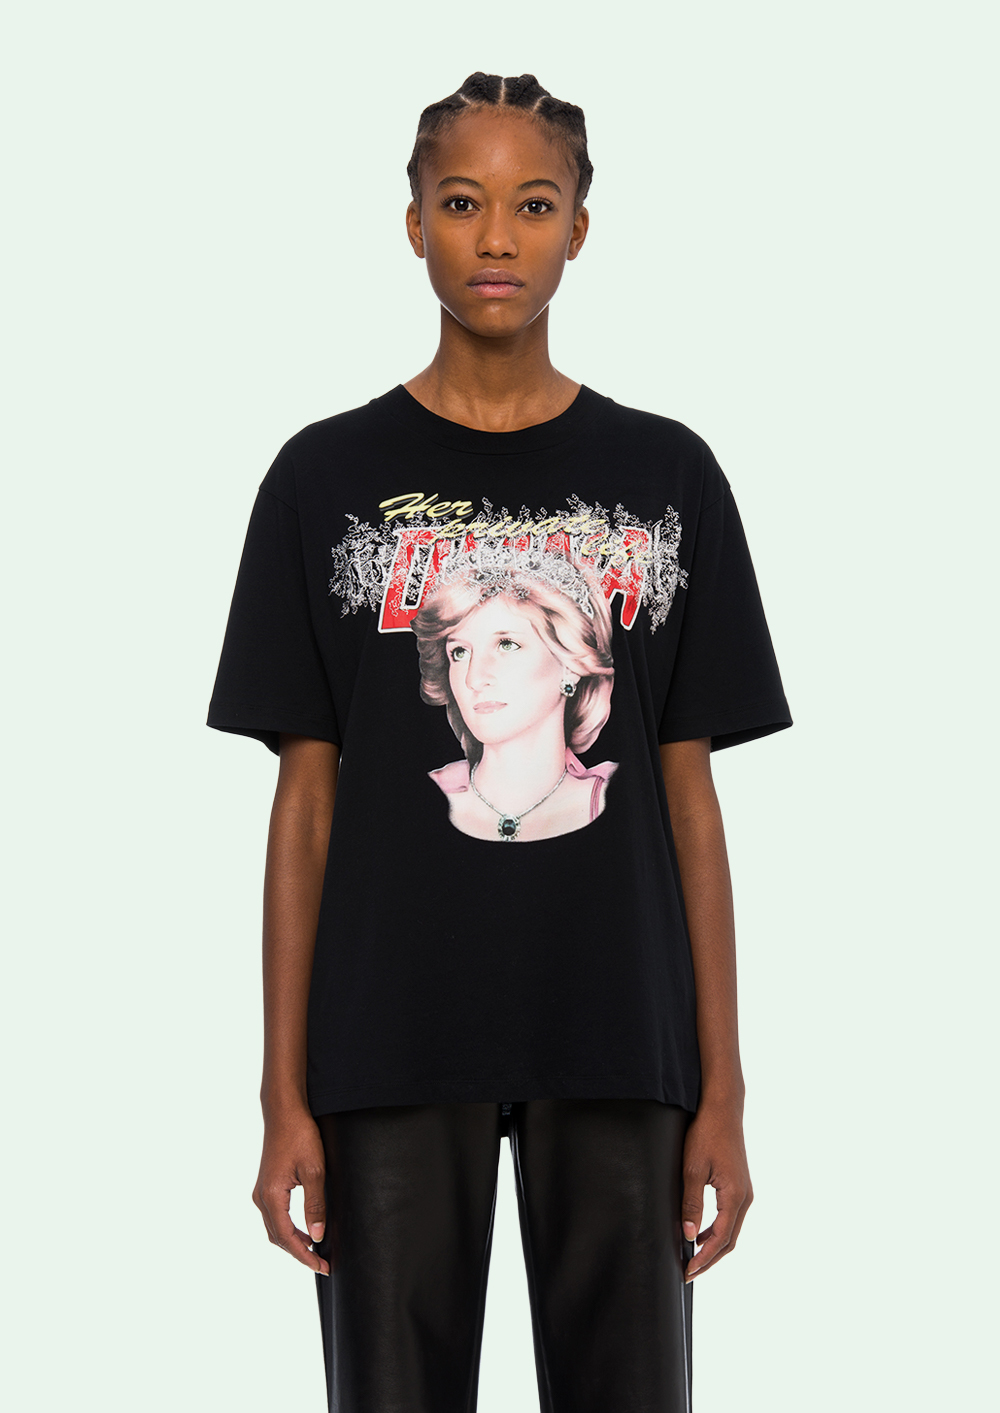 Off-White Princess Diana Tribute T-Shirt Now Available For Pre-Order